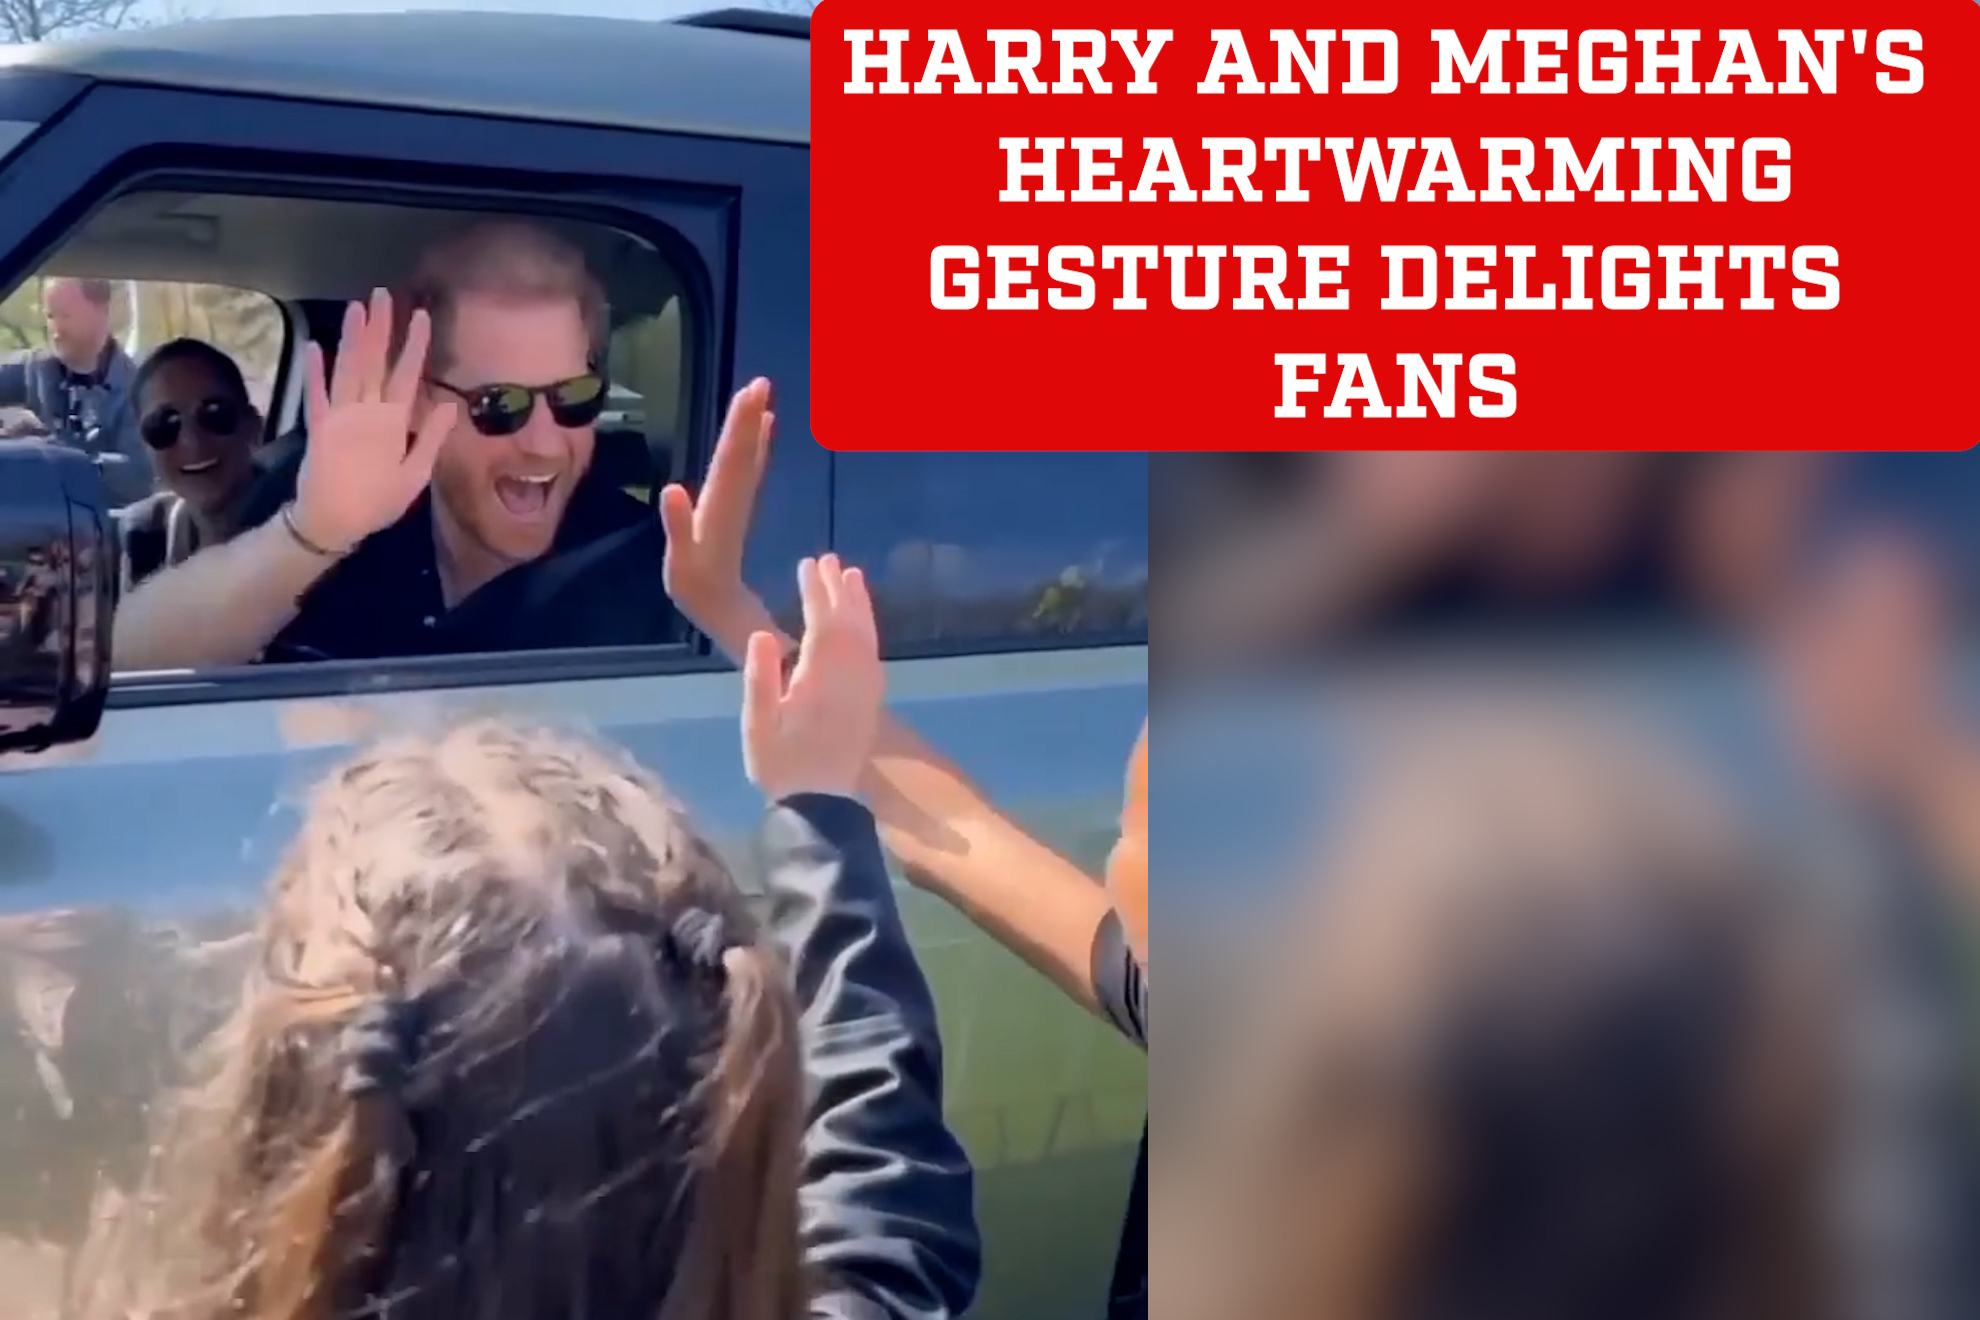 Prince Harry and Meghan Markle delight fans with heartwarming gesture